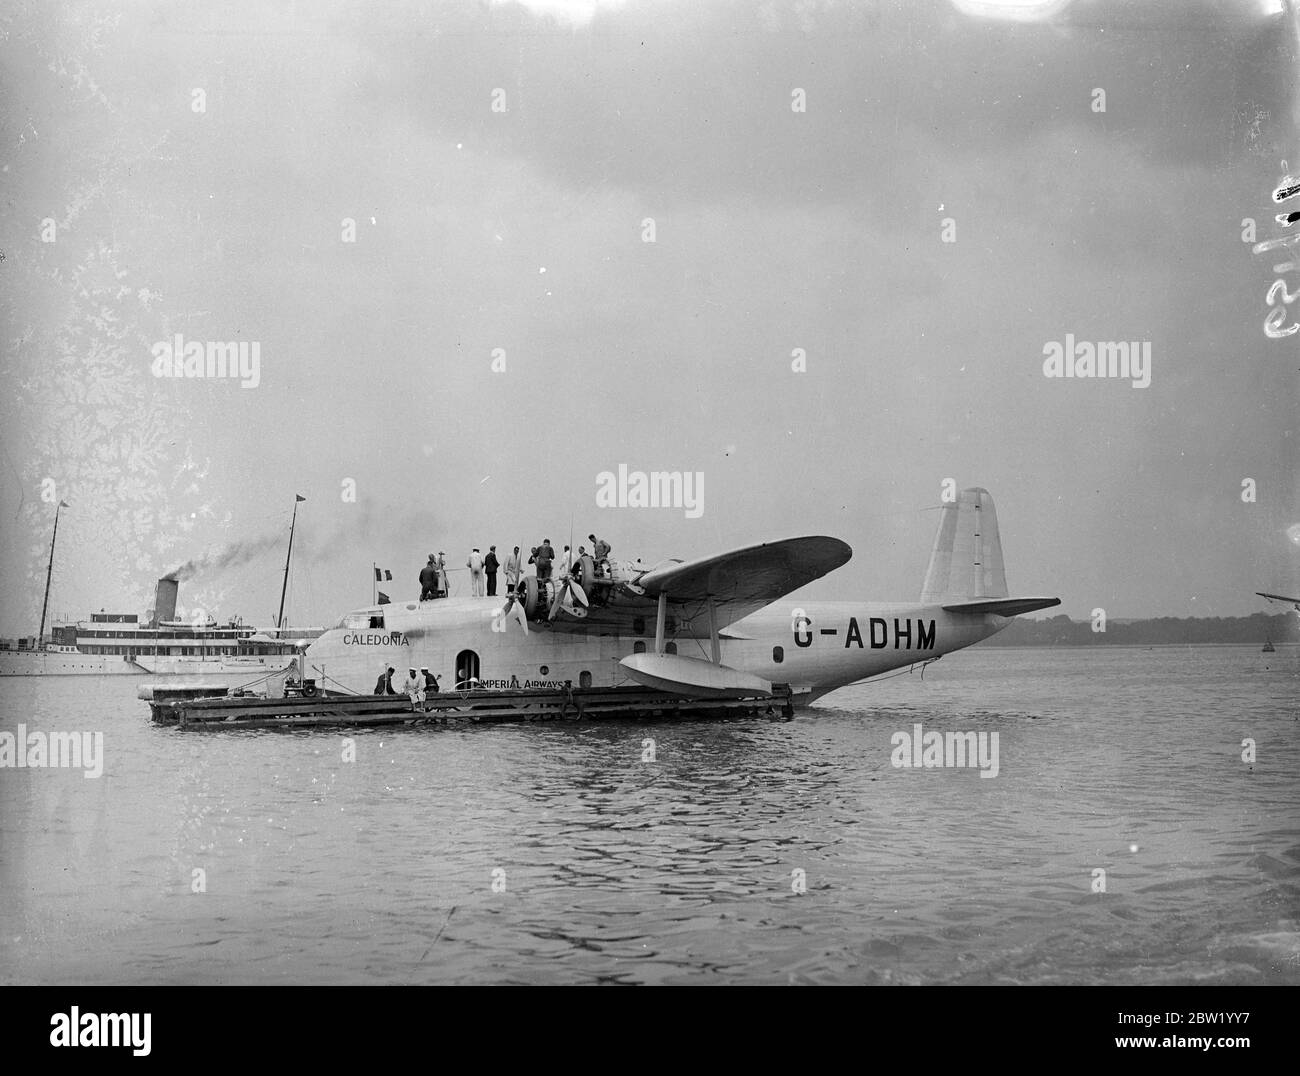 Flying boats 'Caledonia'being prepared for the first commercial Atlantic crossing. The Imperial Airways flying boat 'Caledonia'is being prepared at Hythe for the first experimental commercial transatlantic crossing which she is to make next week (24 June). The 'Caledonia'will be piloted by Capt A S Wilcockson and first officer GH Bowes. Photo shows, mechanics, on top of the Caledonia at Hythe. 19. June 1937 Stock Photo